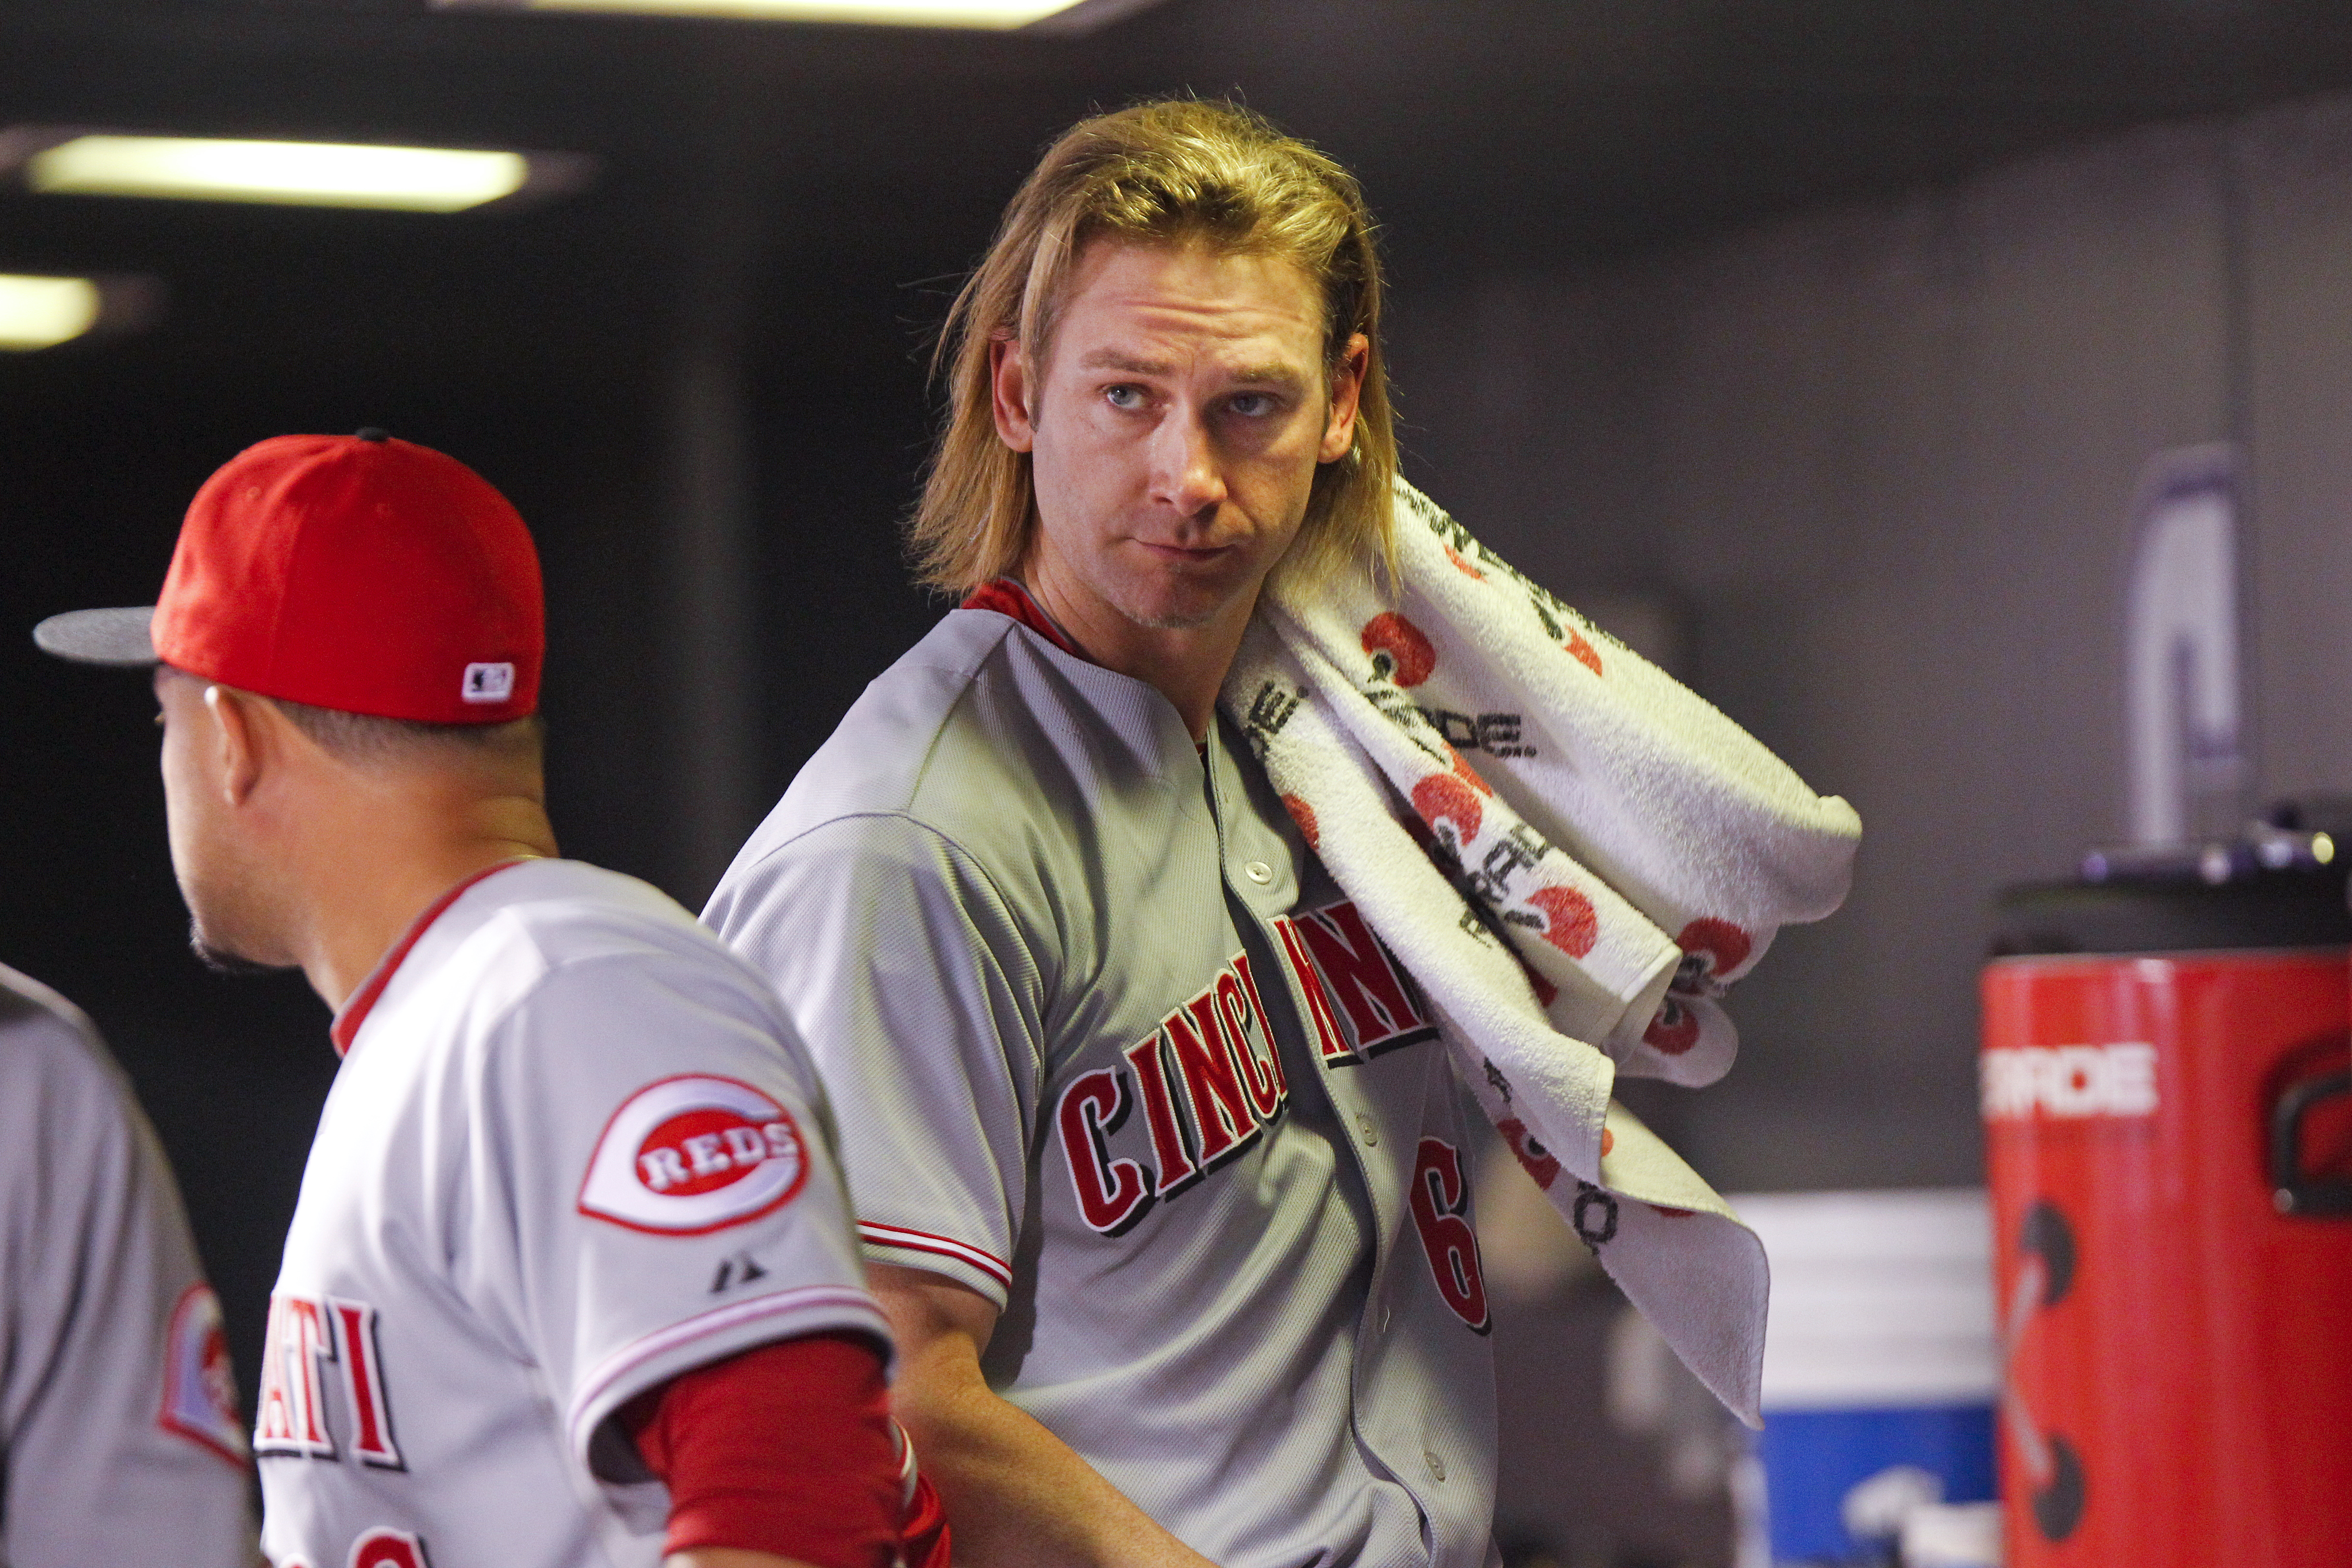 Bronson Arroyo kept right on playing, even after retiring from baseball -  The Boston Globe